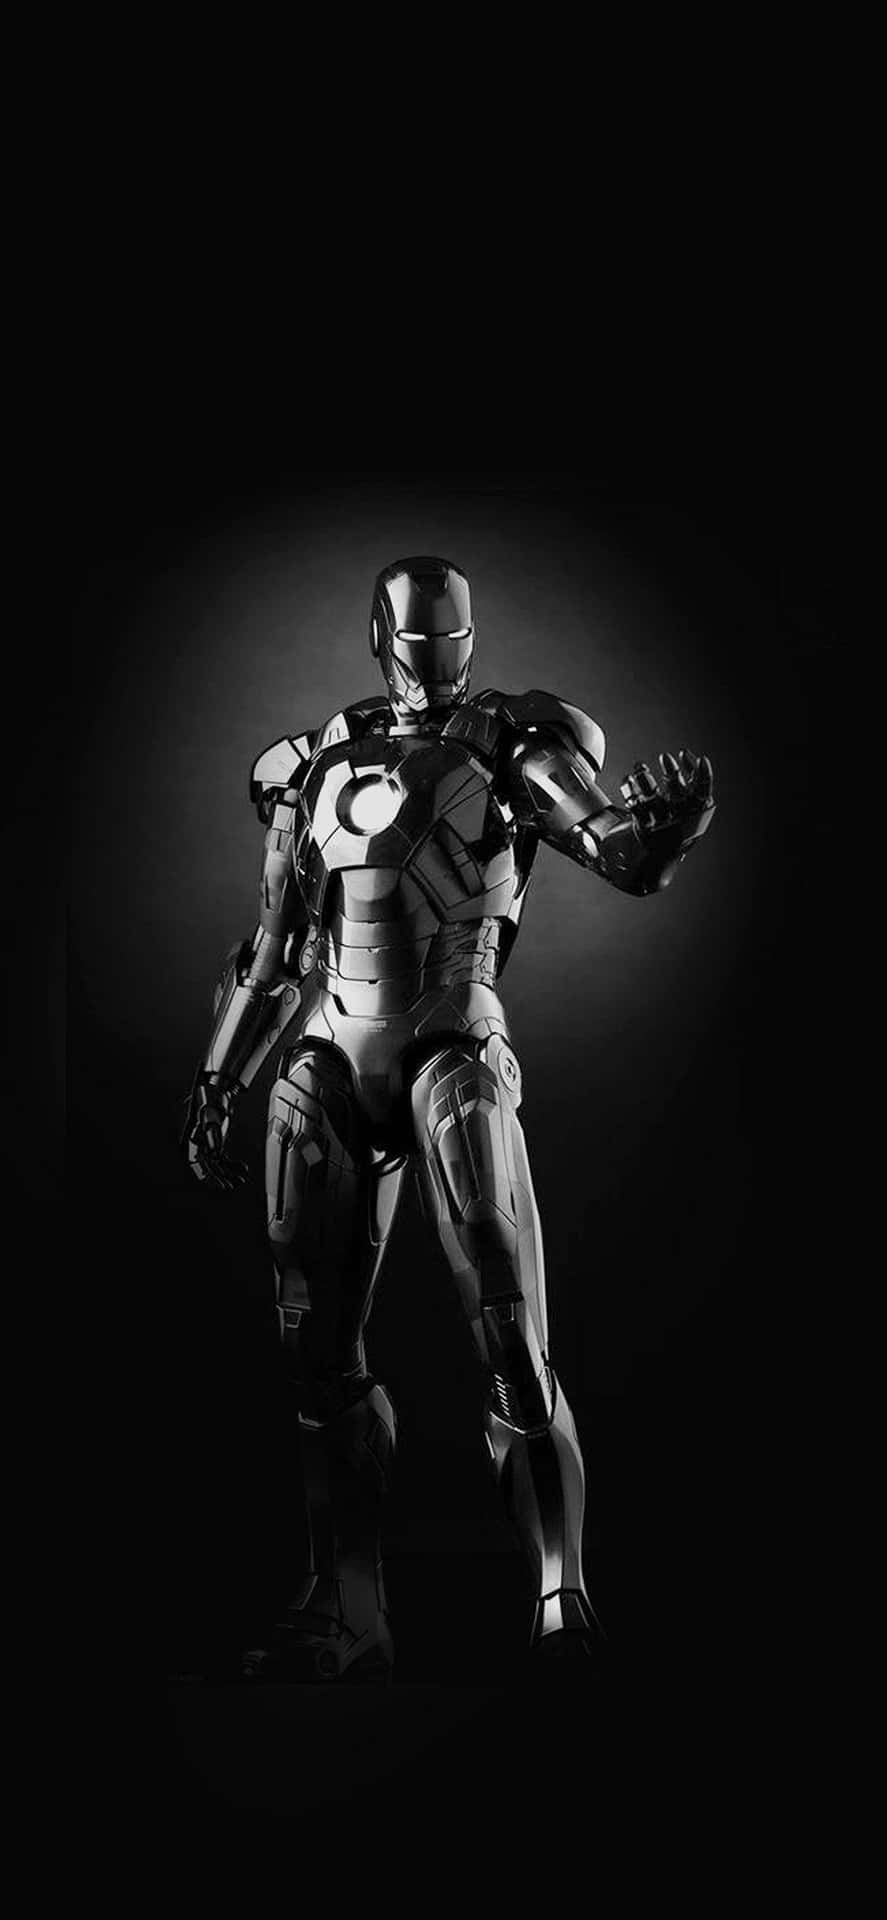 Tony Stark Suited Up in Iron Man Armor Wallpaper